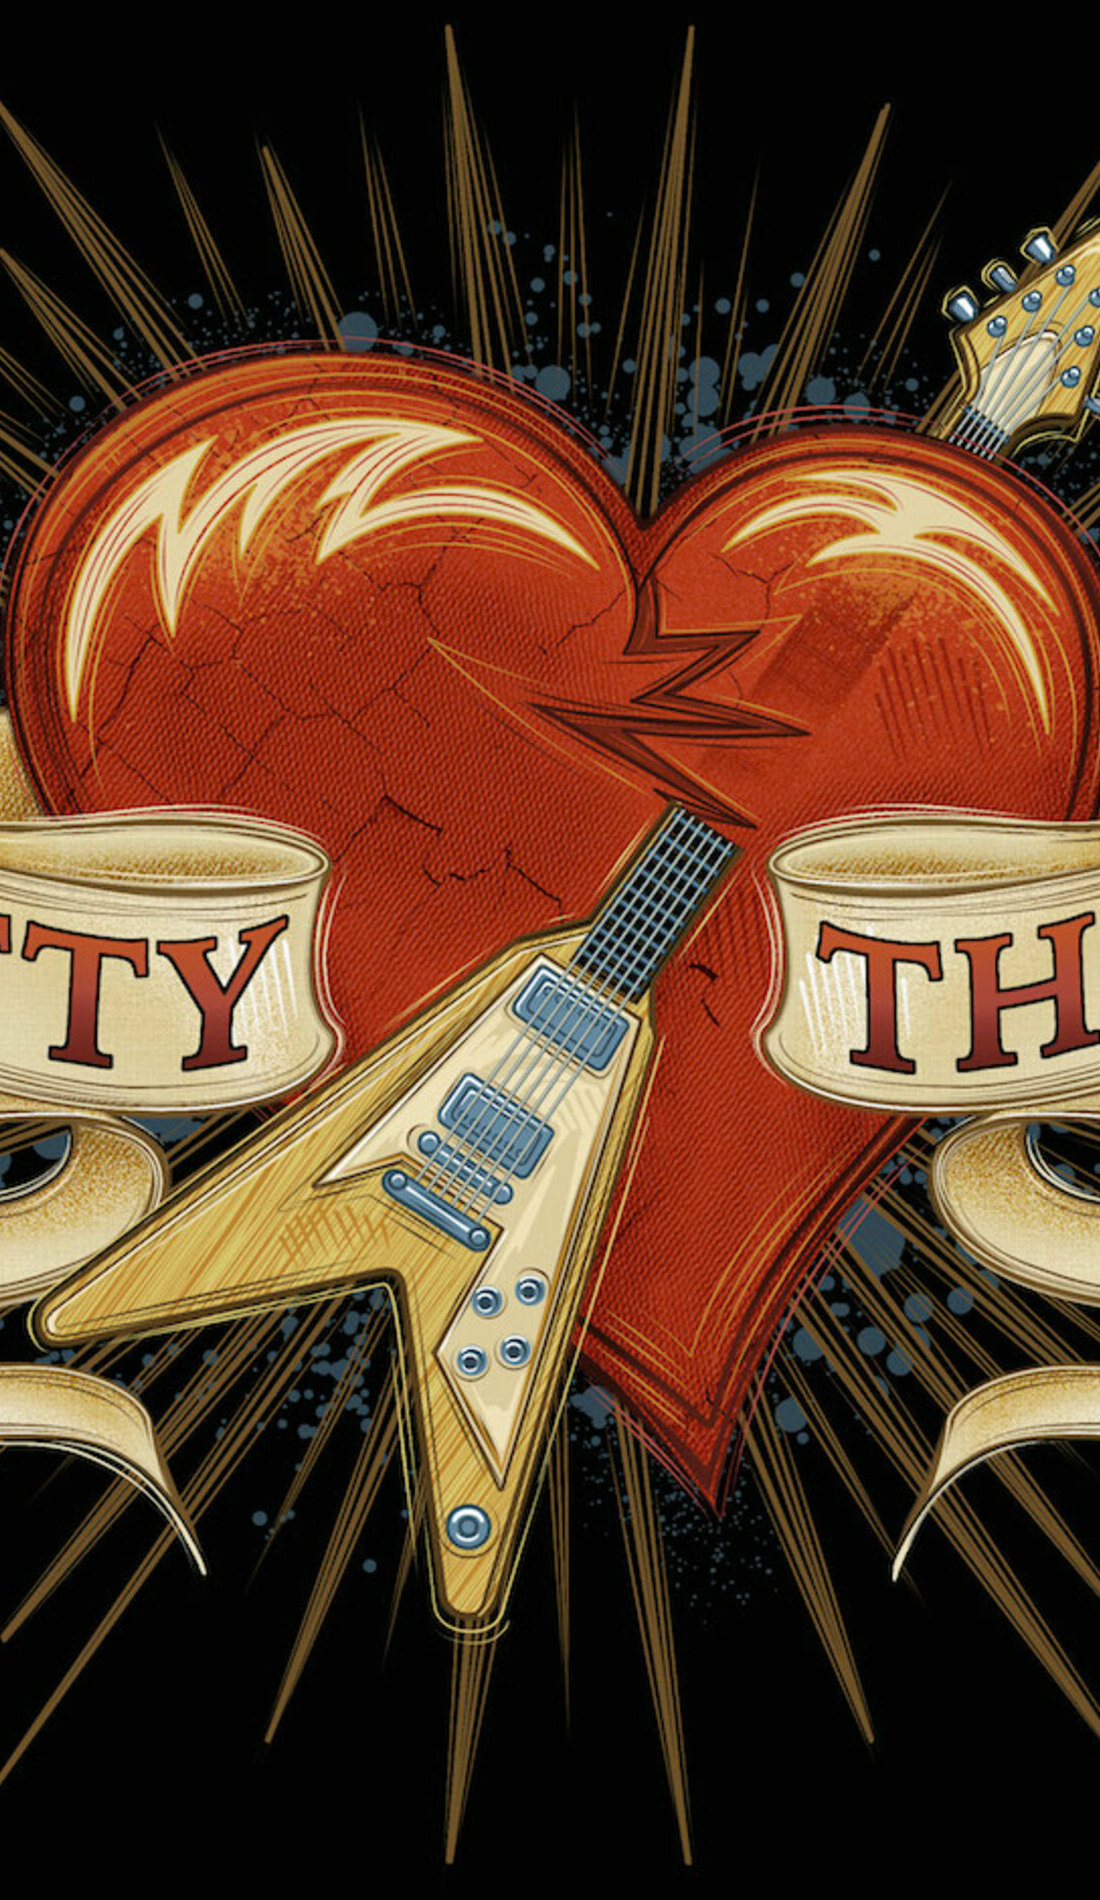 A Petty Theft - Tom Petty Tribute live event